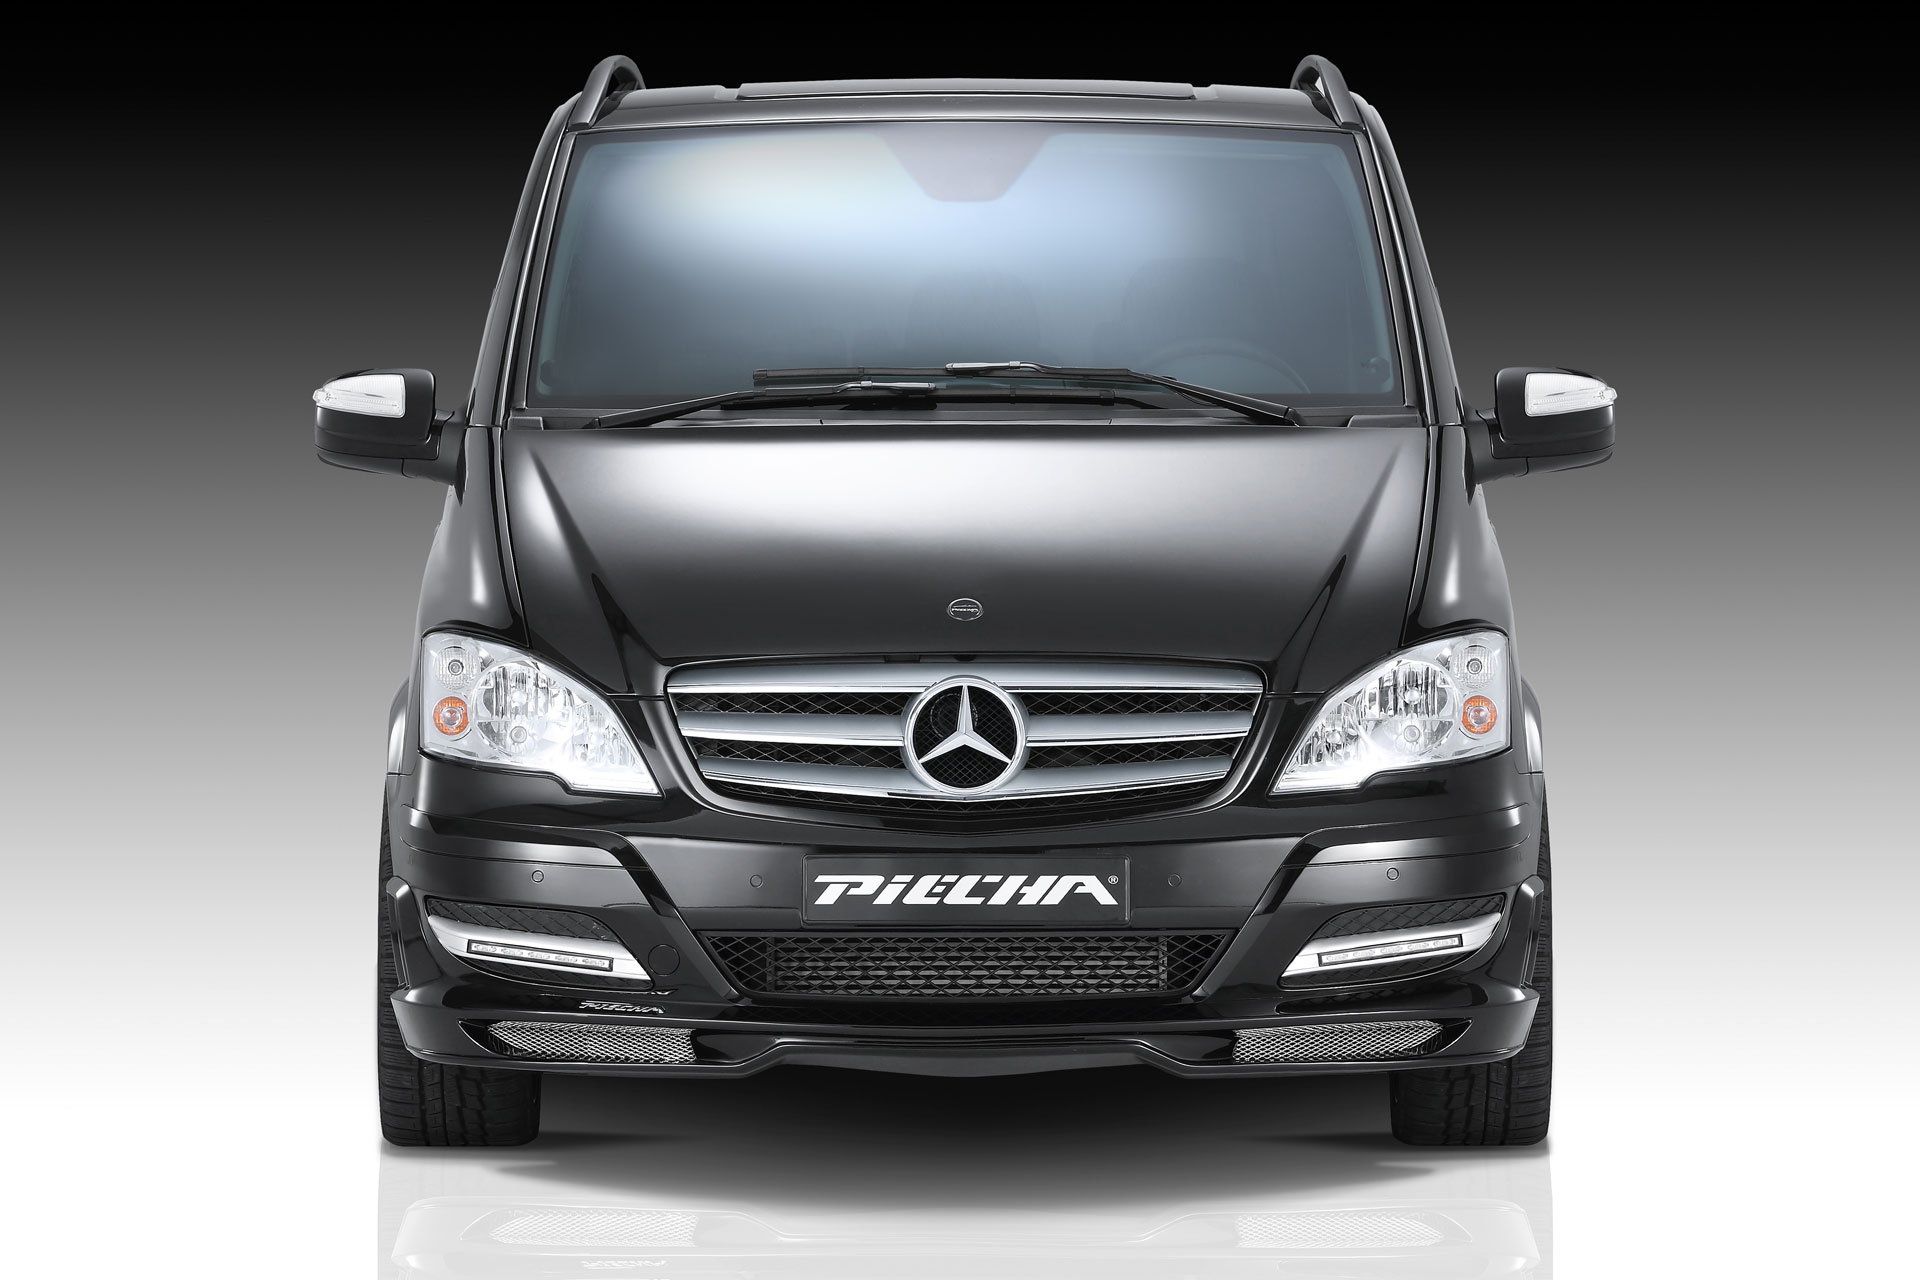 PIECHA front spoiler lip with side grille  only usable for Viano bumper